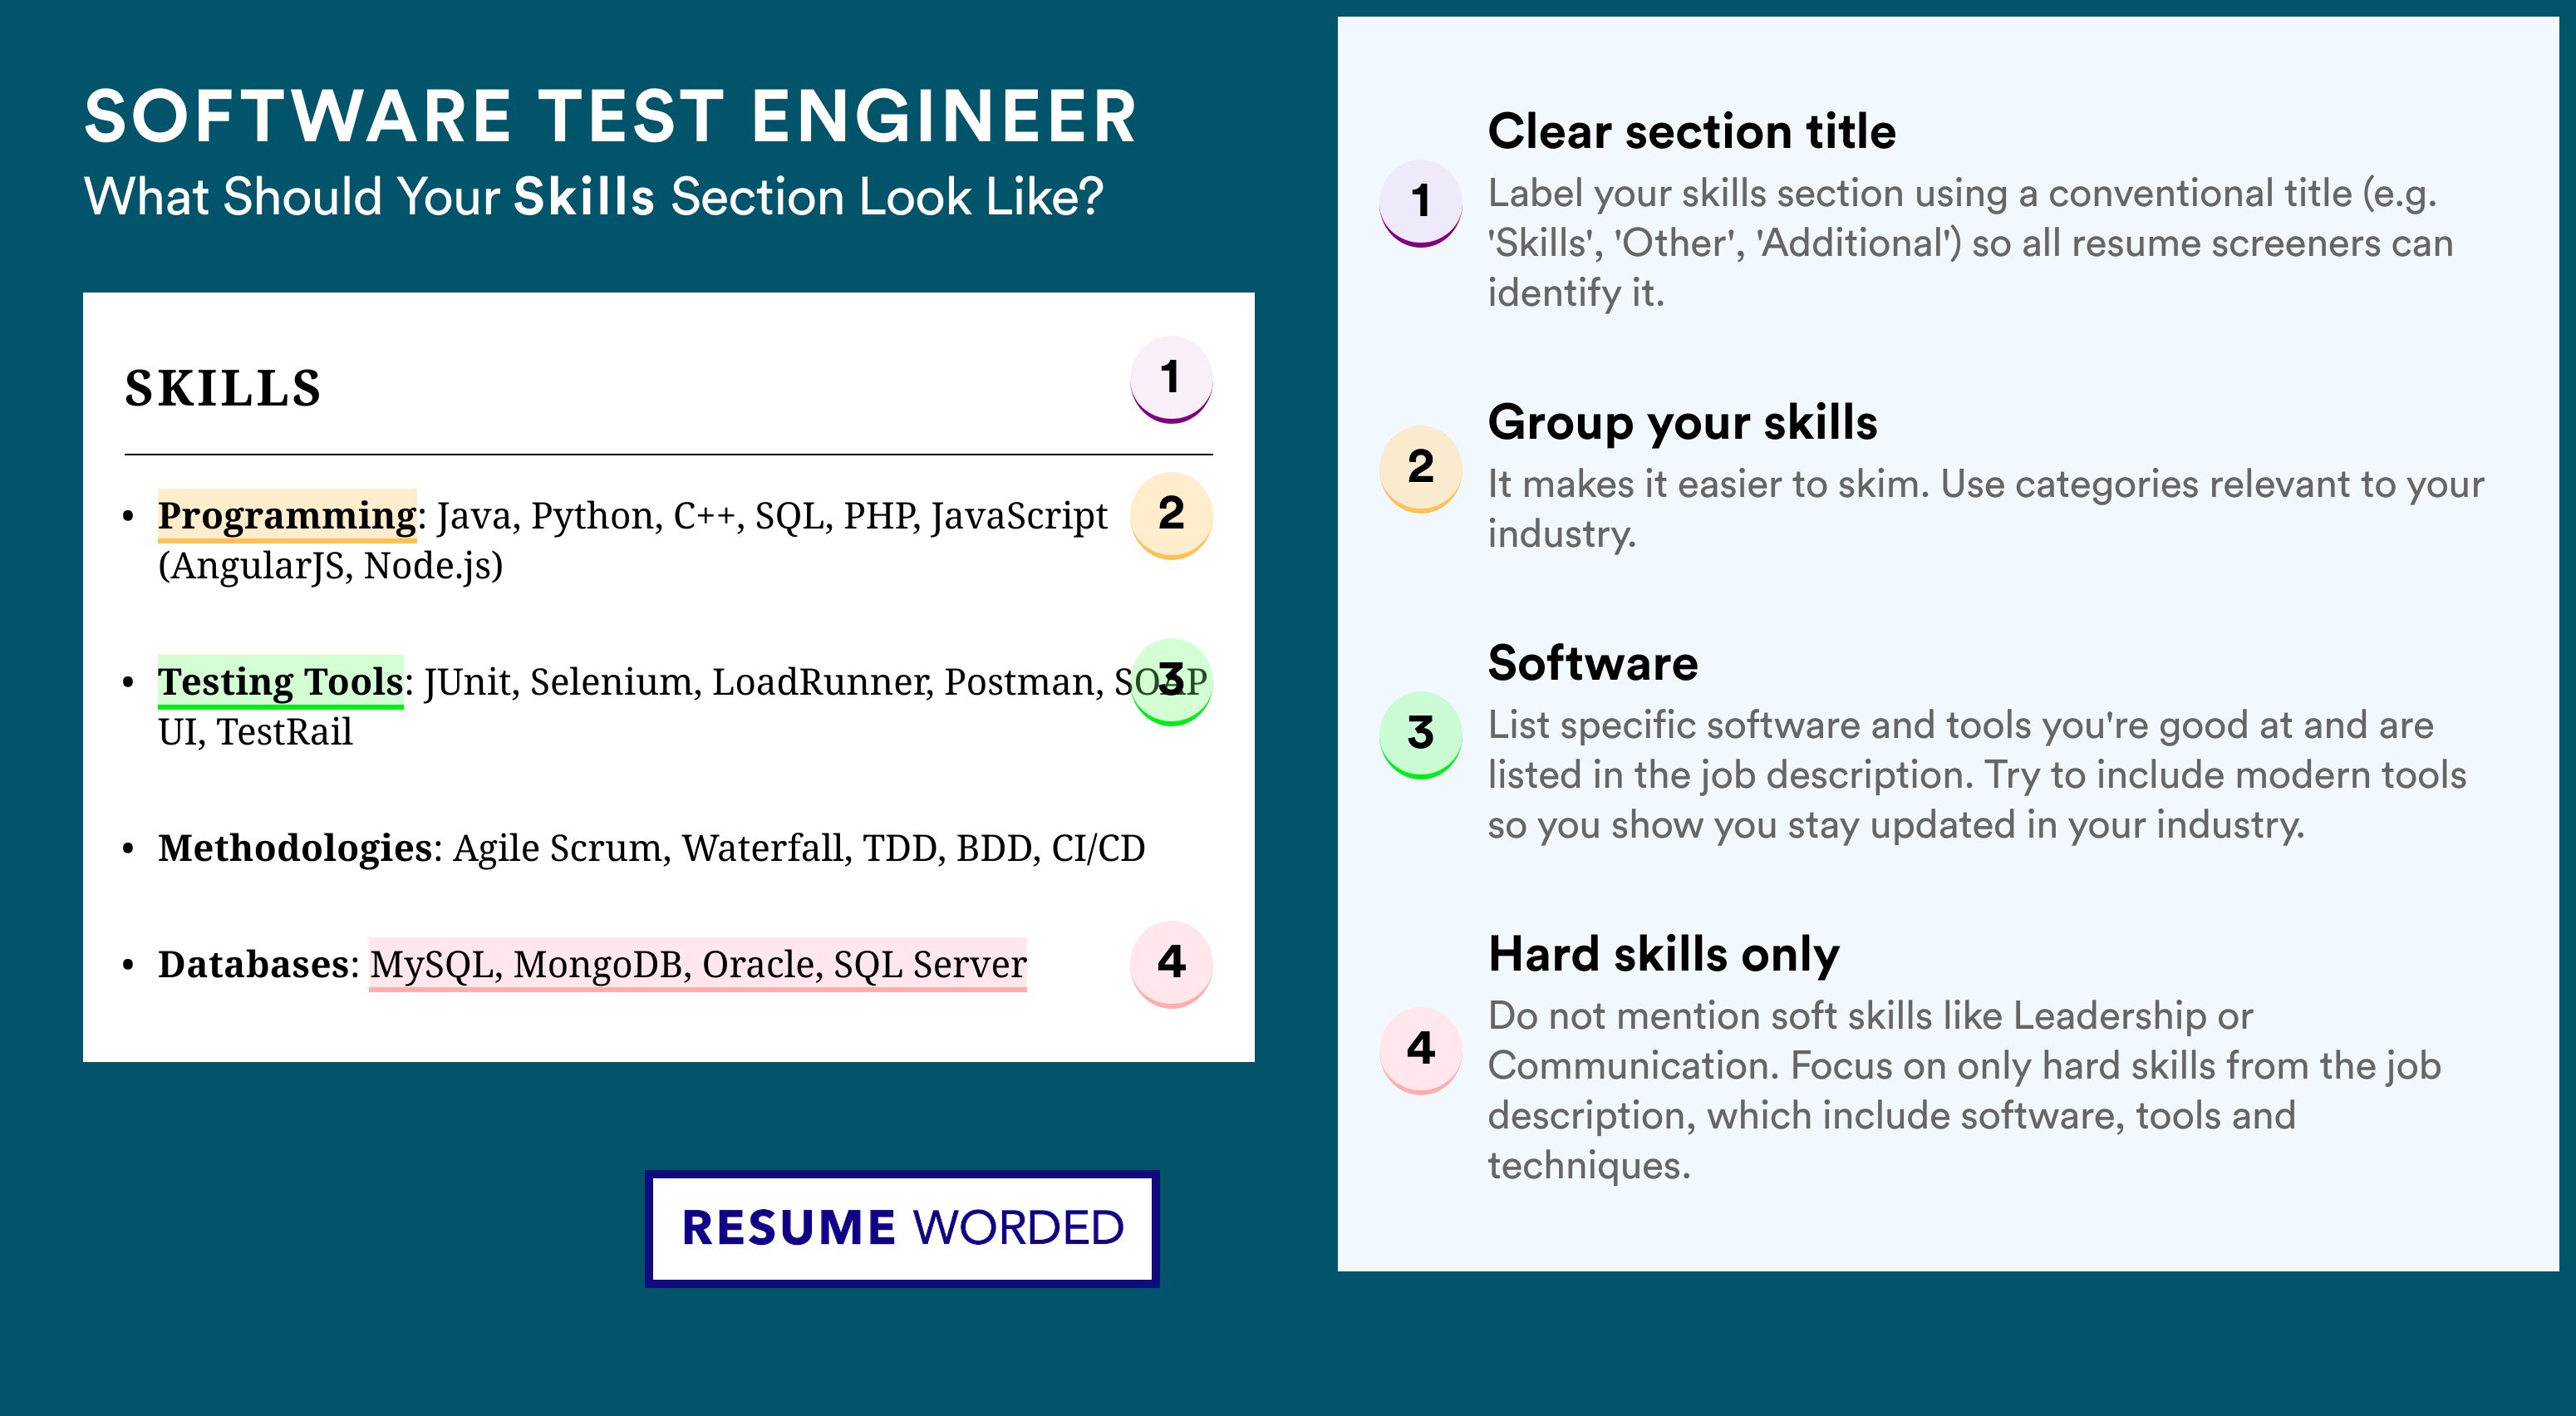 How To Write Your Skills Section - Software Test Engineer Roles